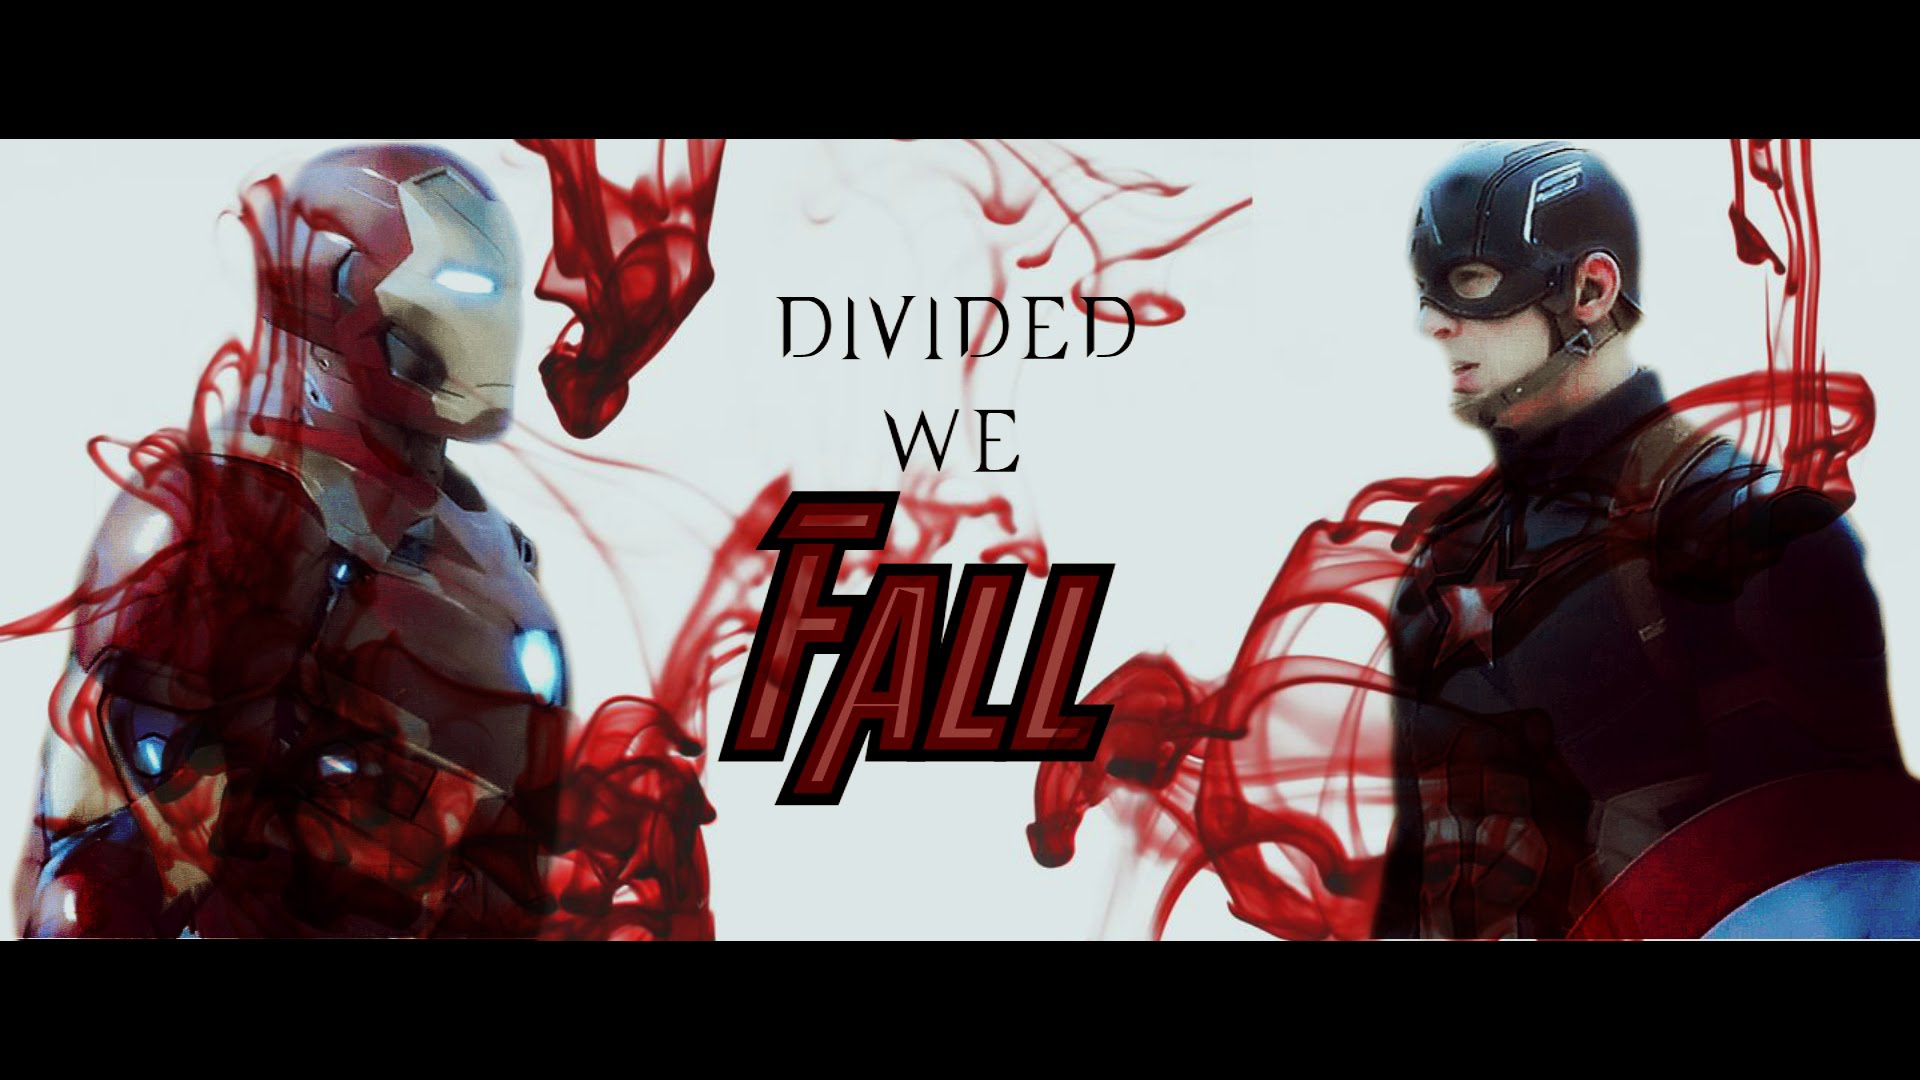 Divided We Fall Pics, Comics Collection - Together We Stand Divided We Fall Captain America - HD Wallpaper 